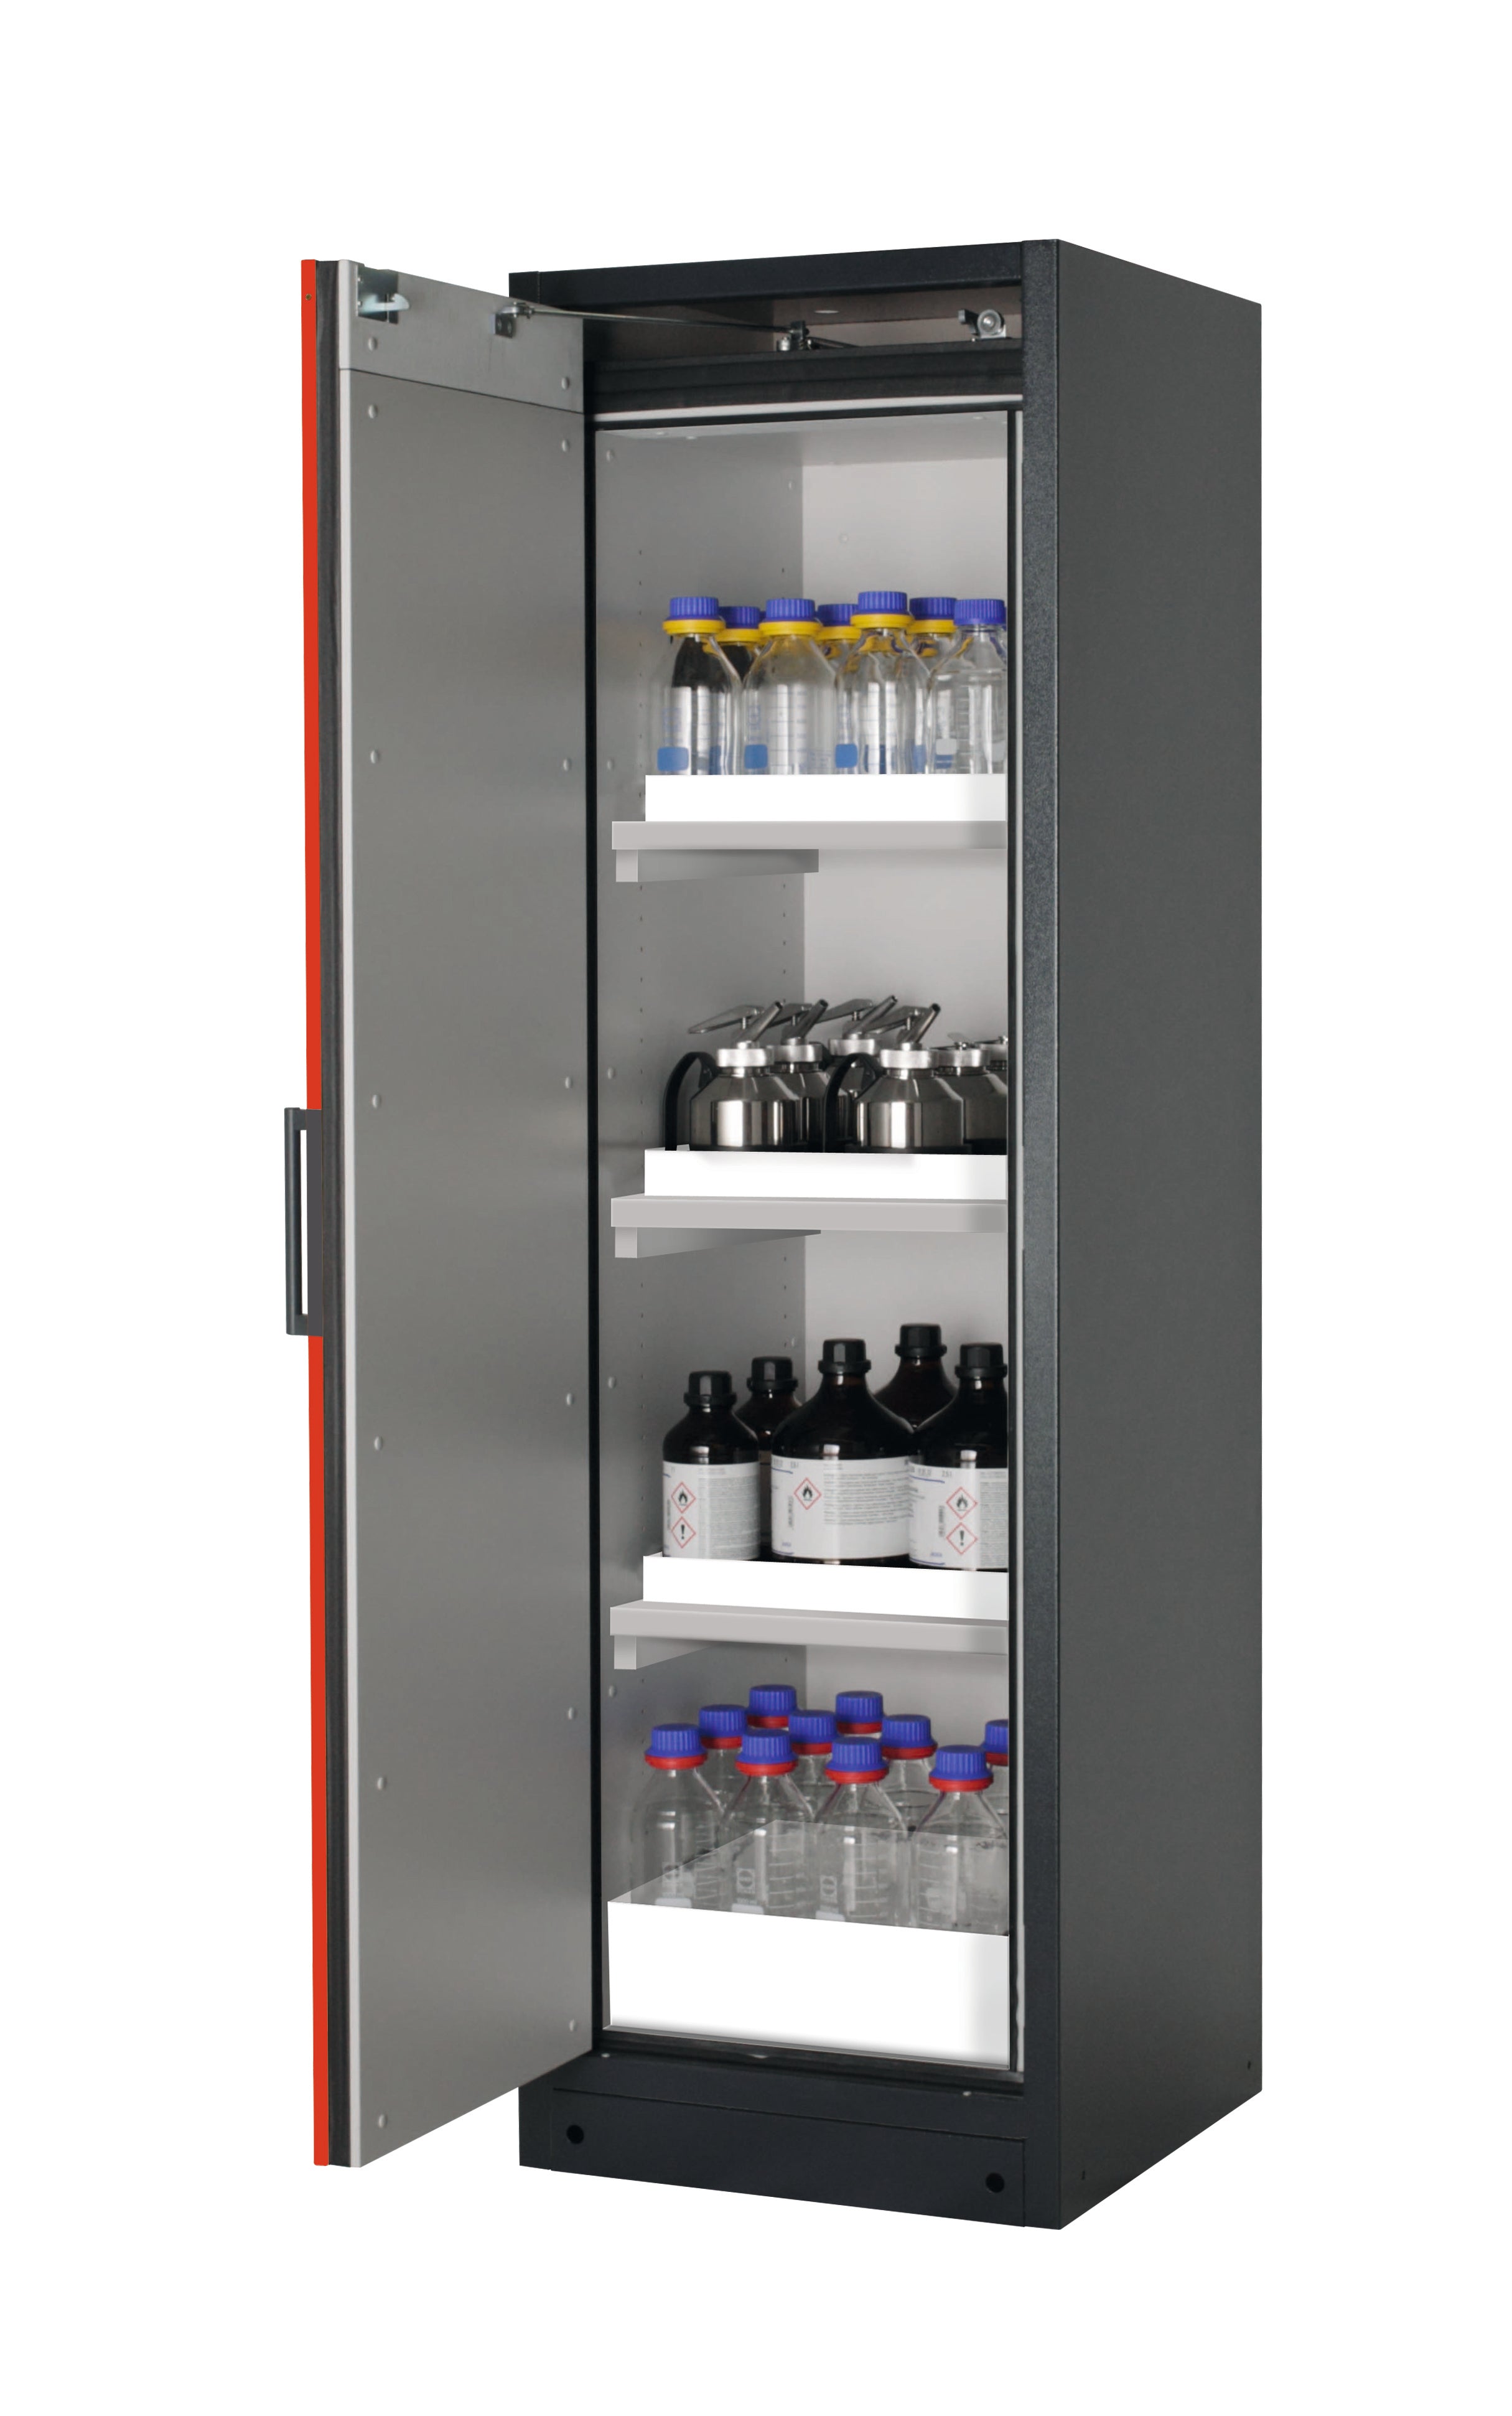 Type 90 safety storage cabinet Q-CLASSIC-90 model Q90.195.060 in traffic red RAL 3020 with 3x tray shelf (standard) (polypropylene),